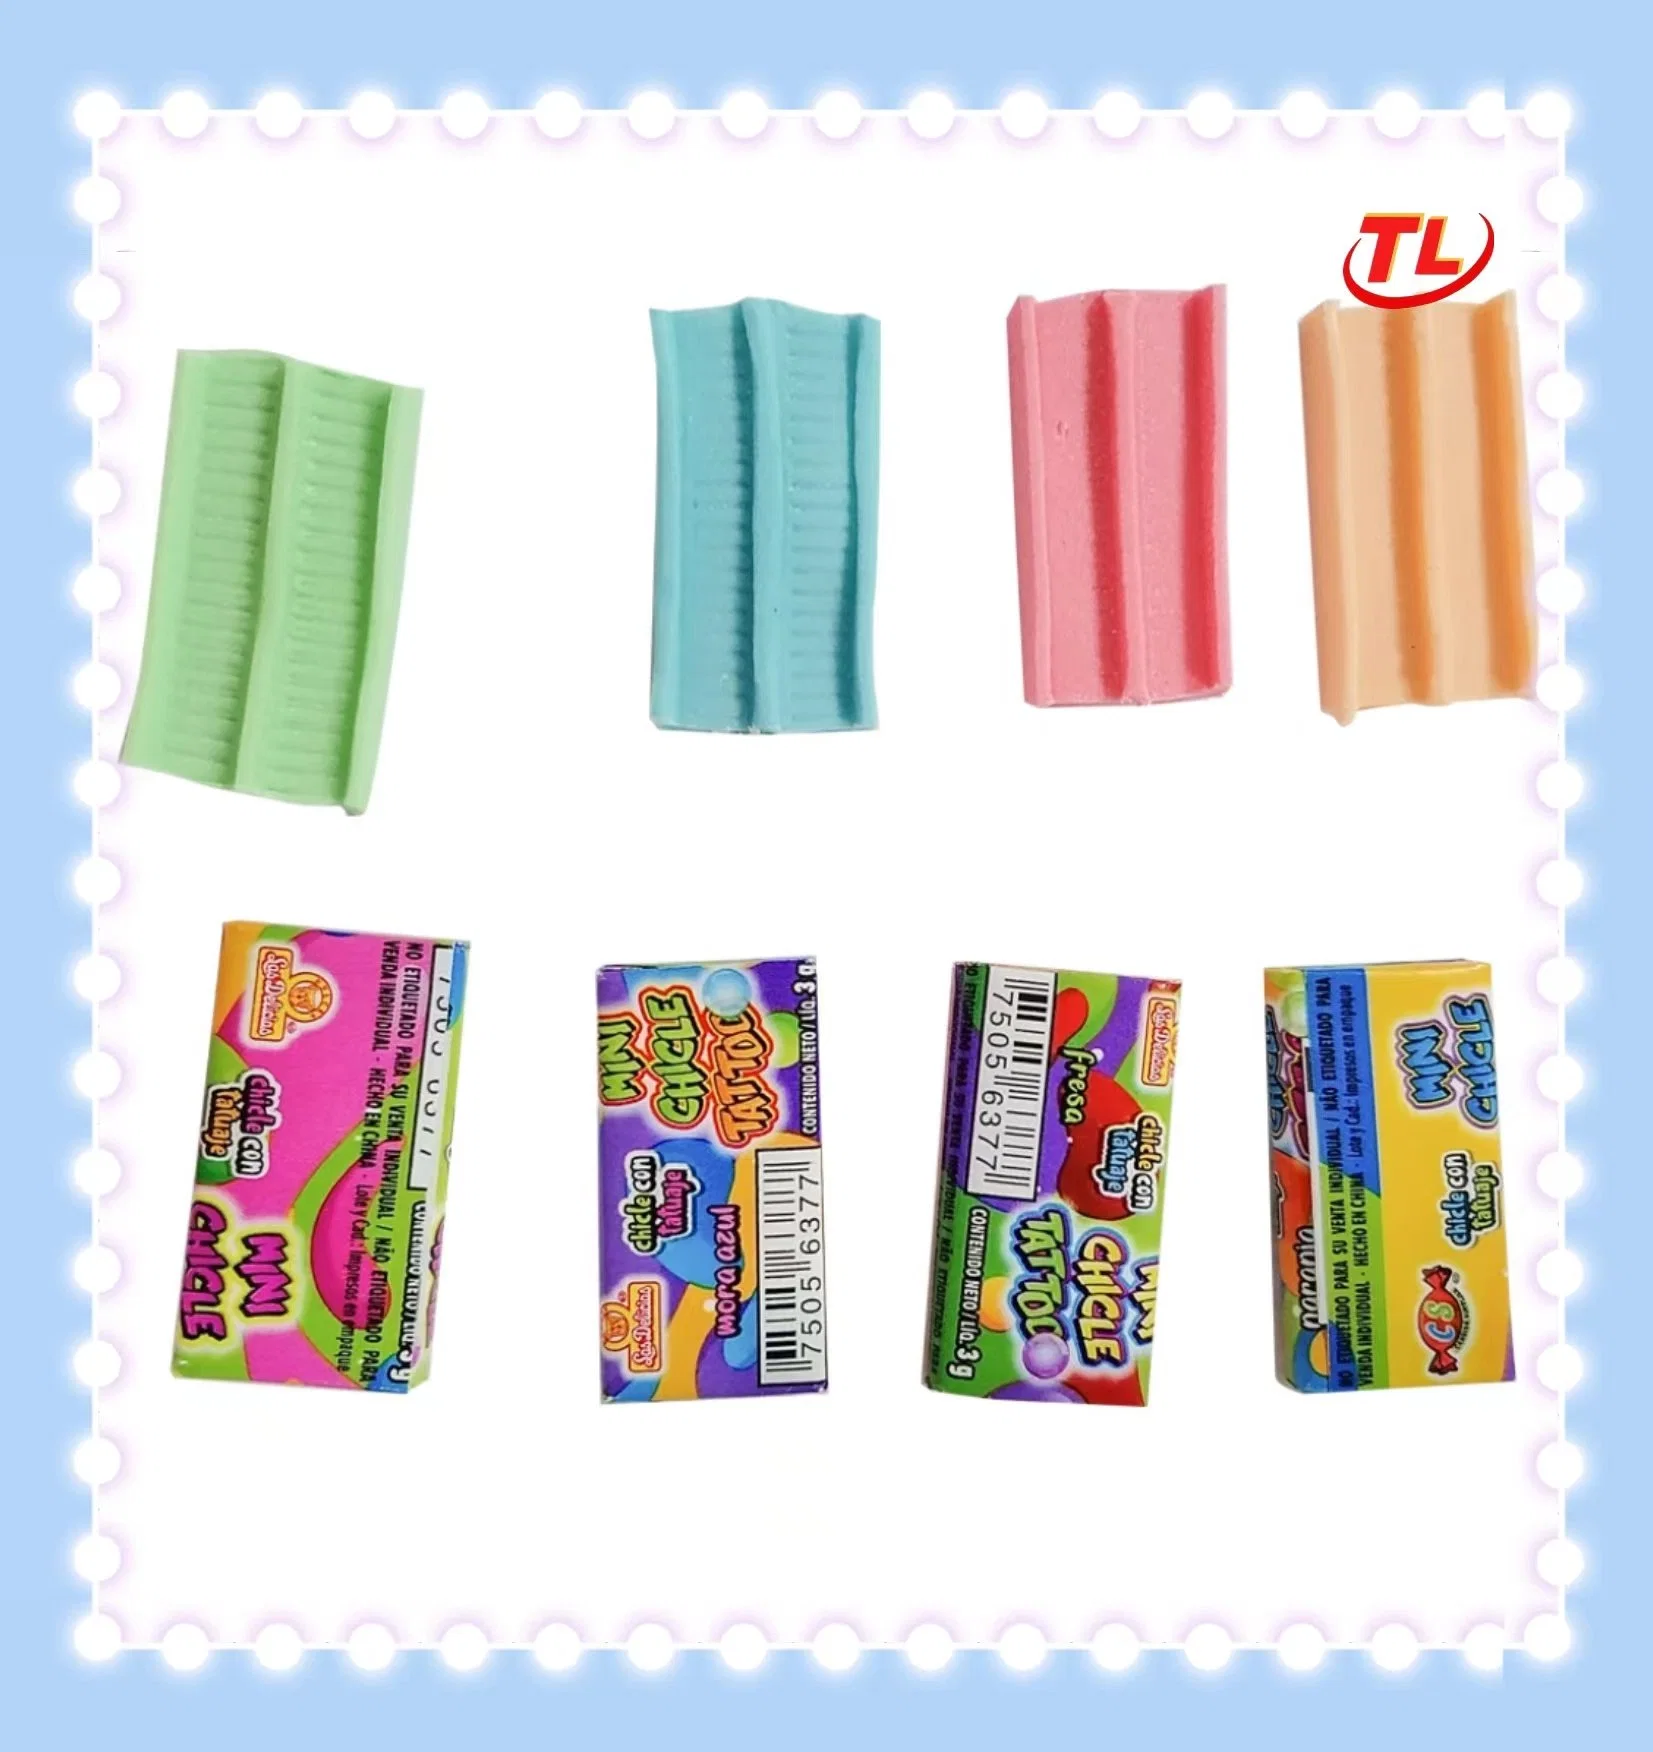 4.5g 3G Single Color Mint Flavour Bubble Chewing Gum with High Quality